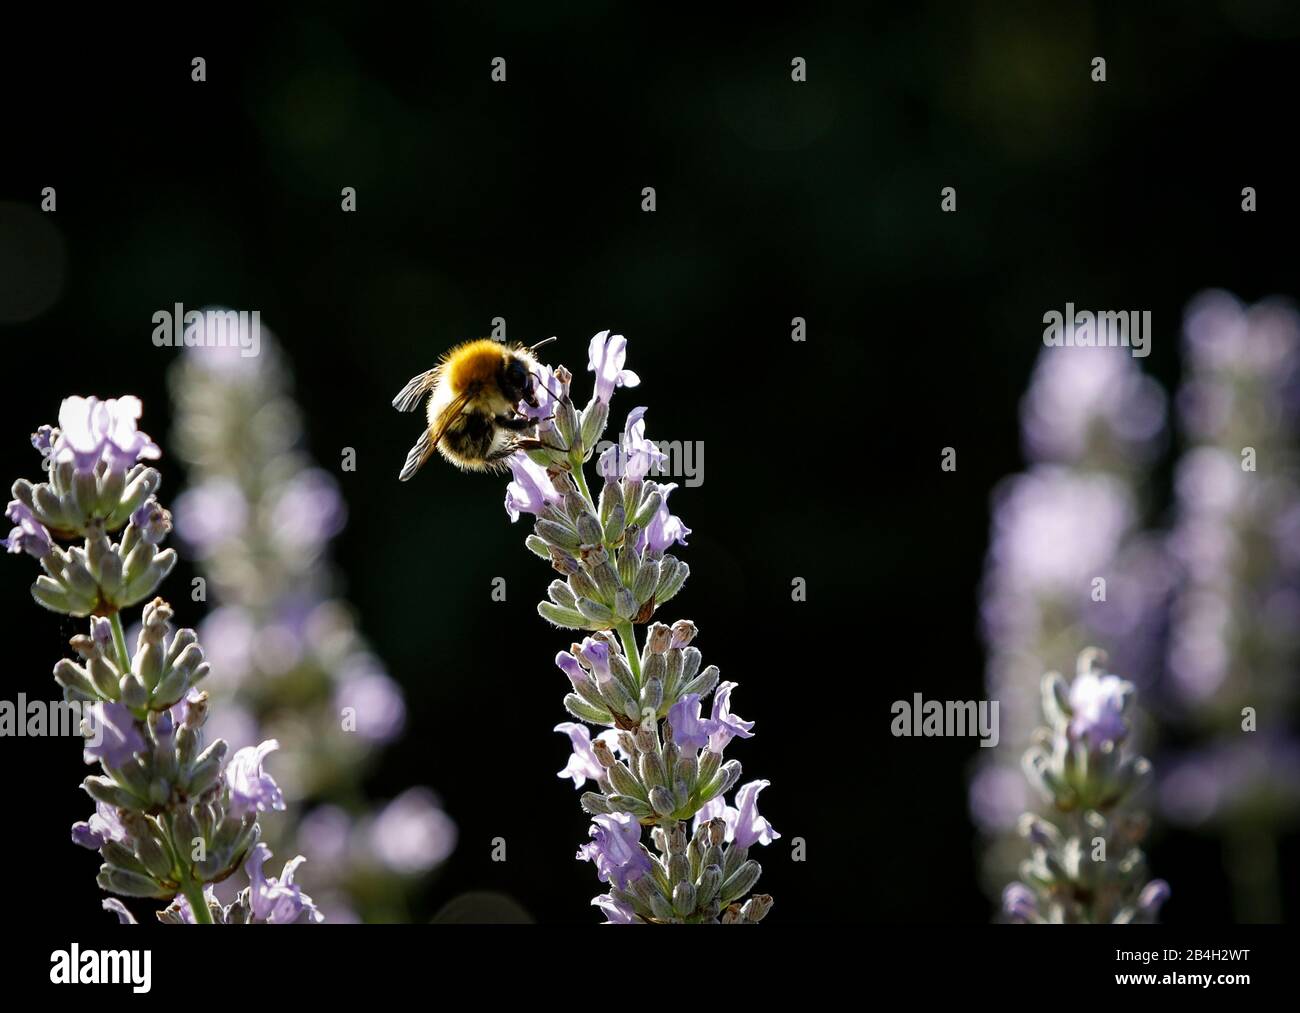 Field bumblebee on lavender Stock Photo